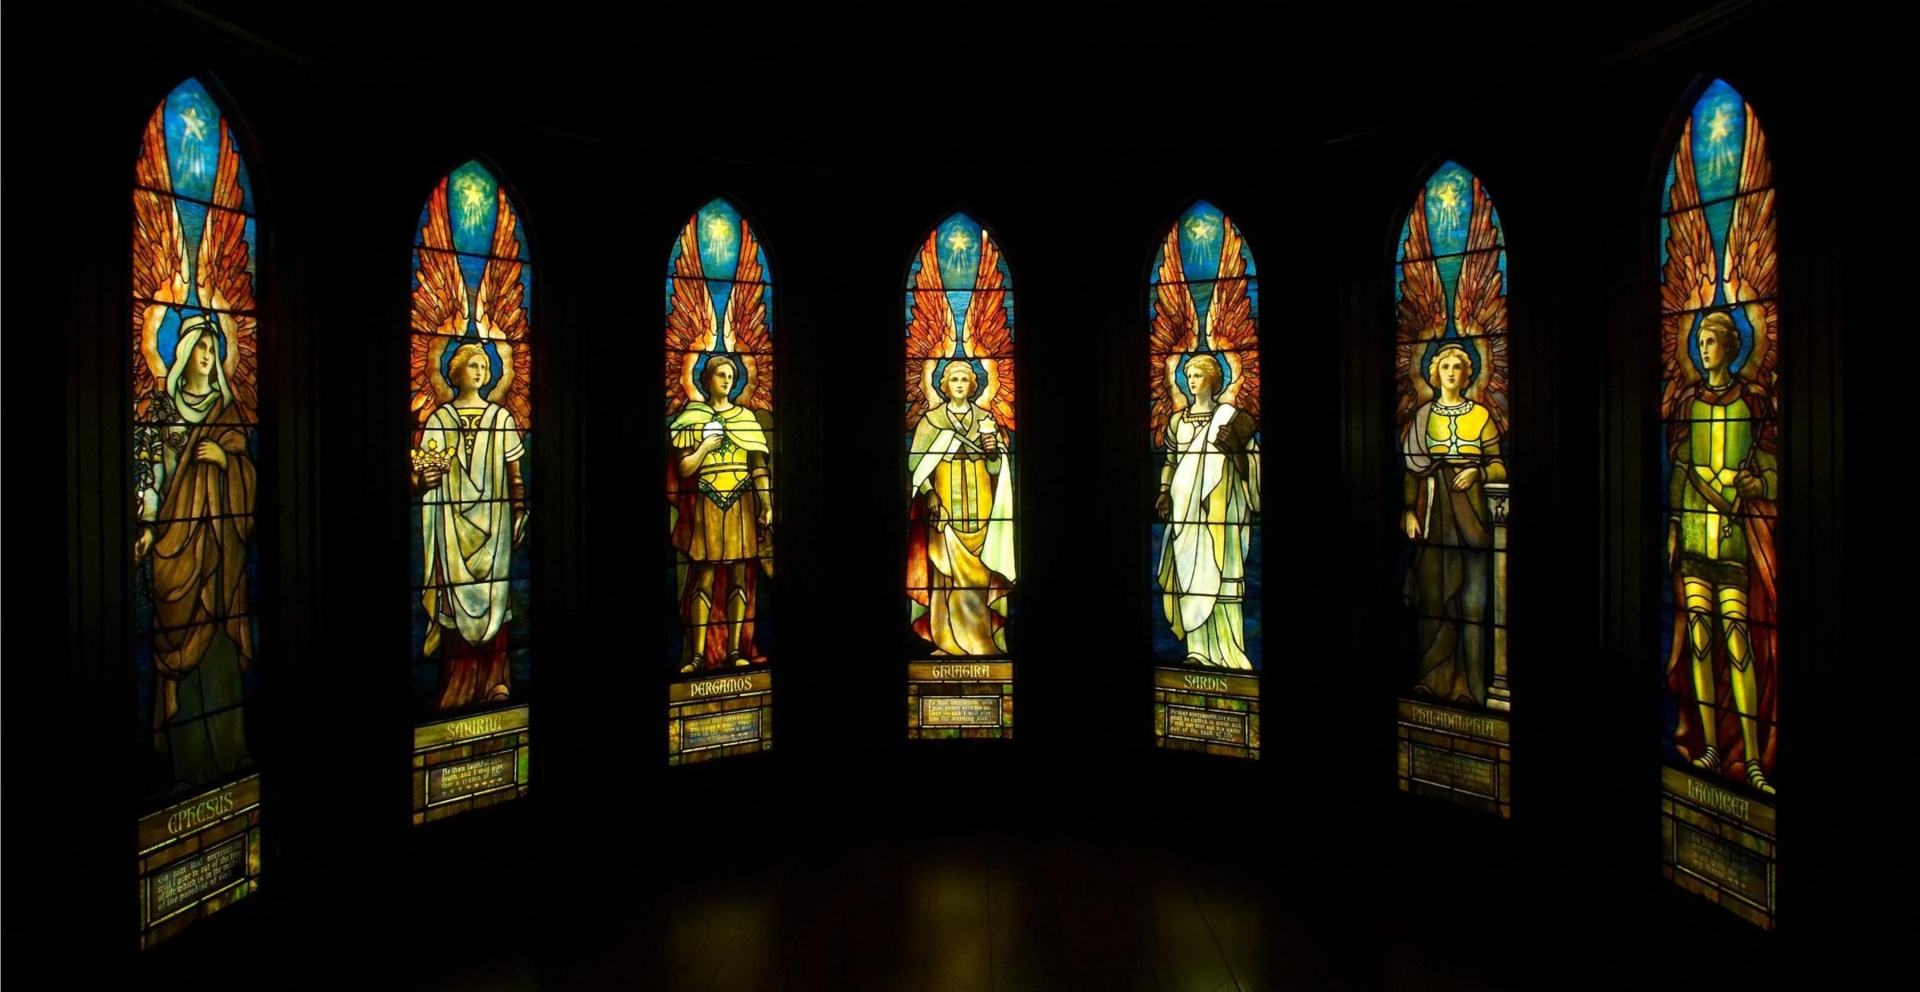 Angels in Stained Glass Windows